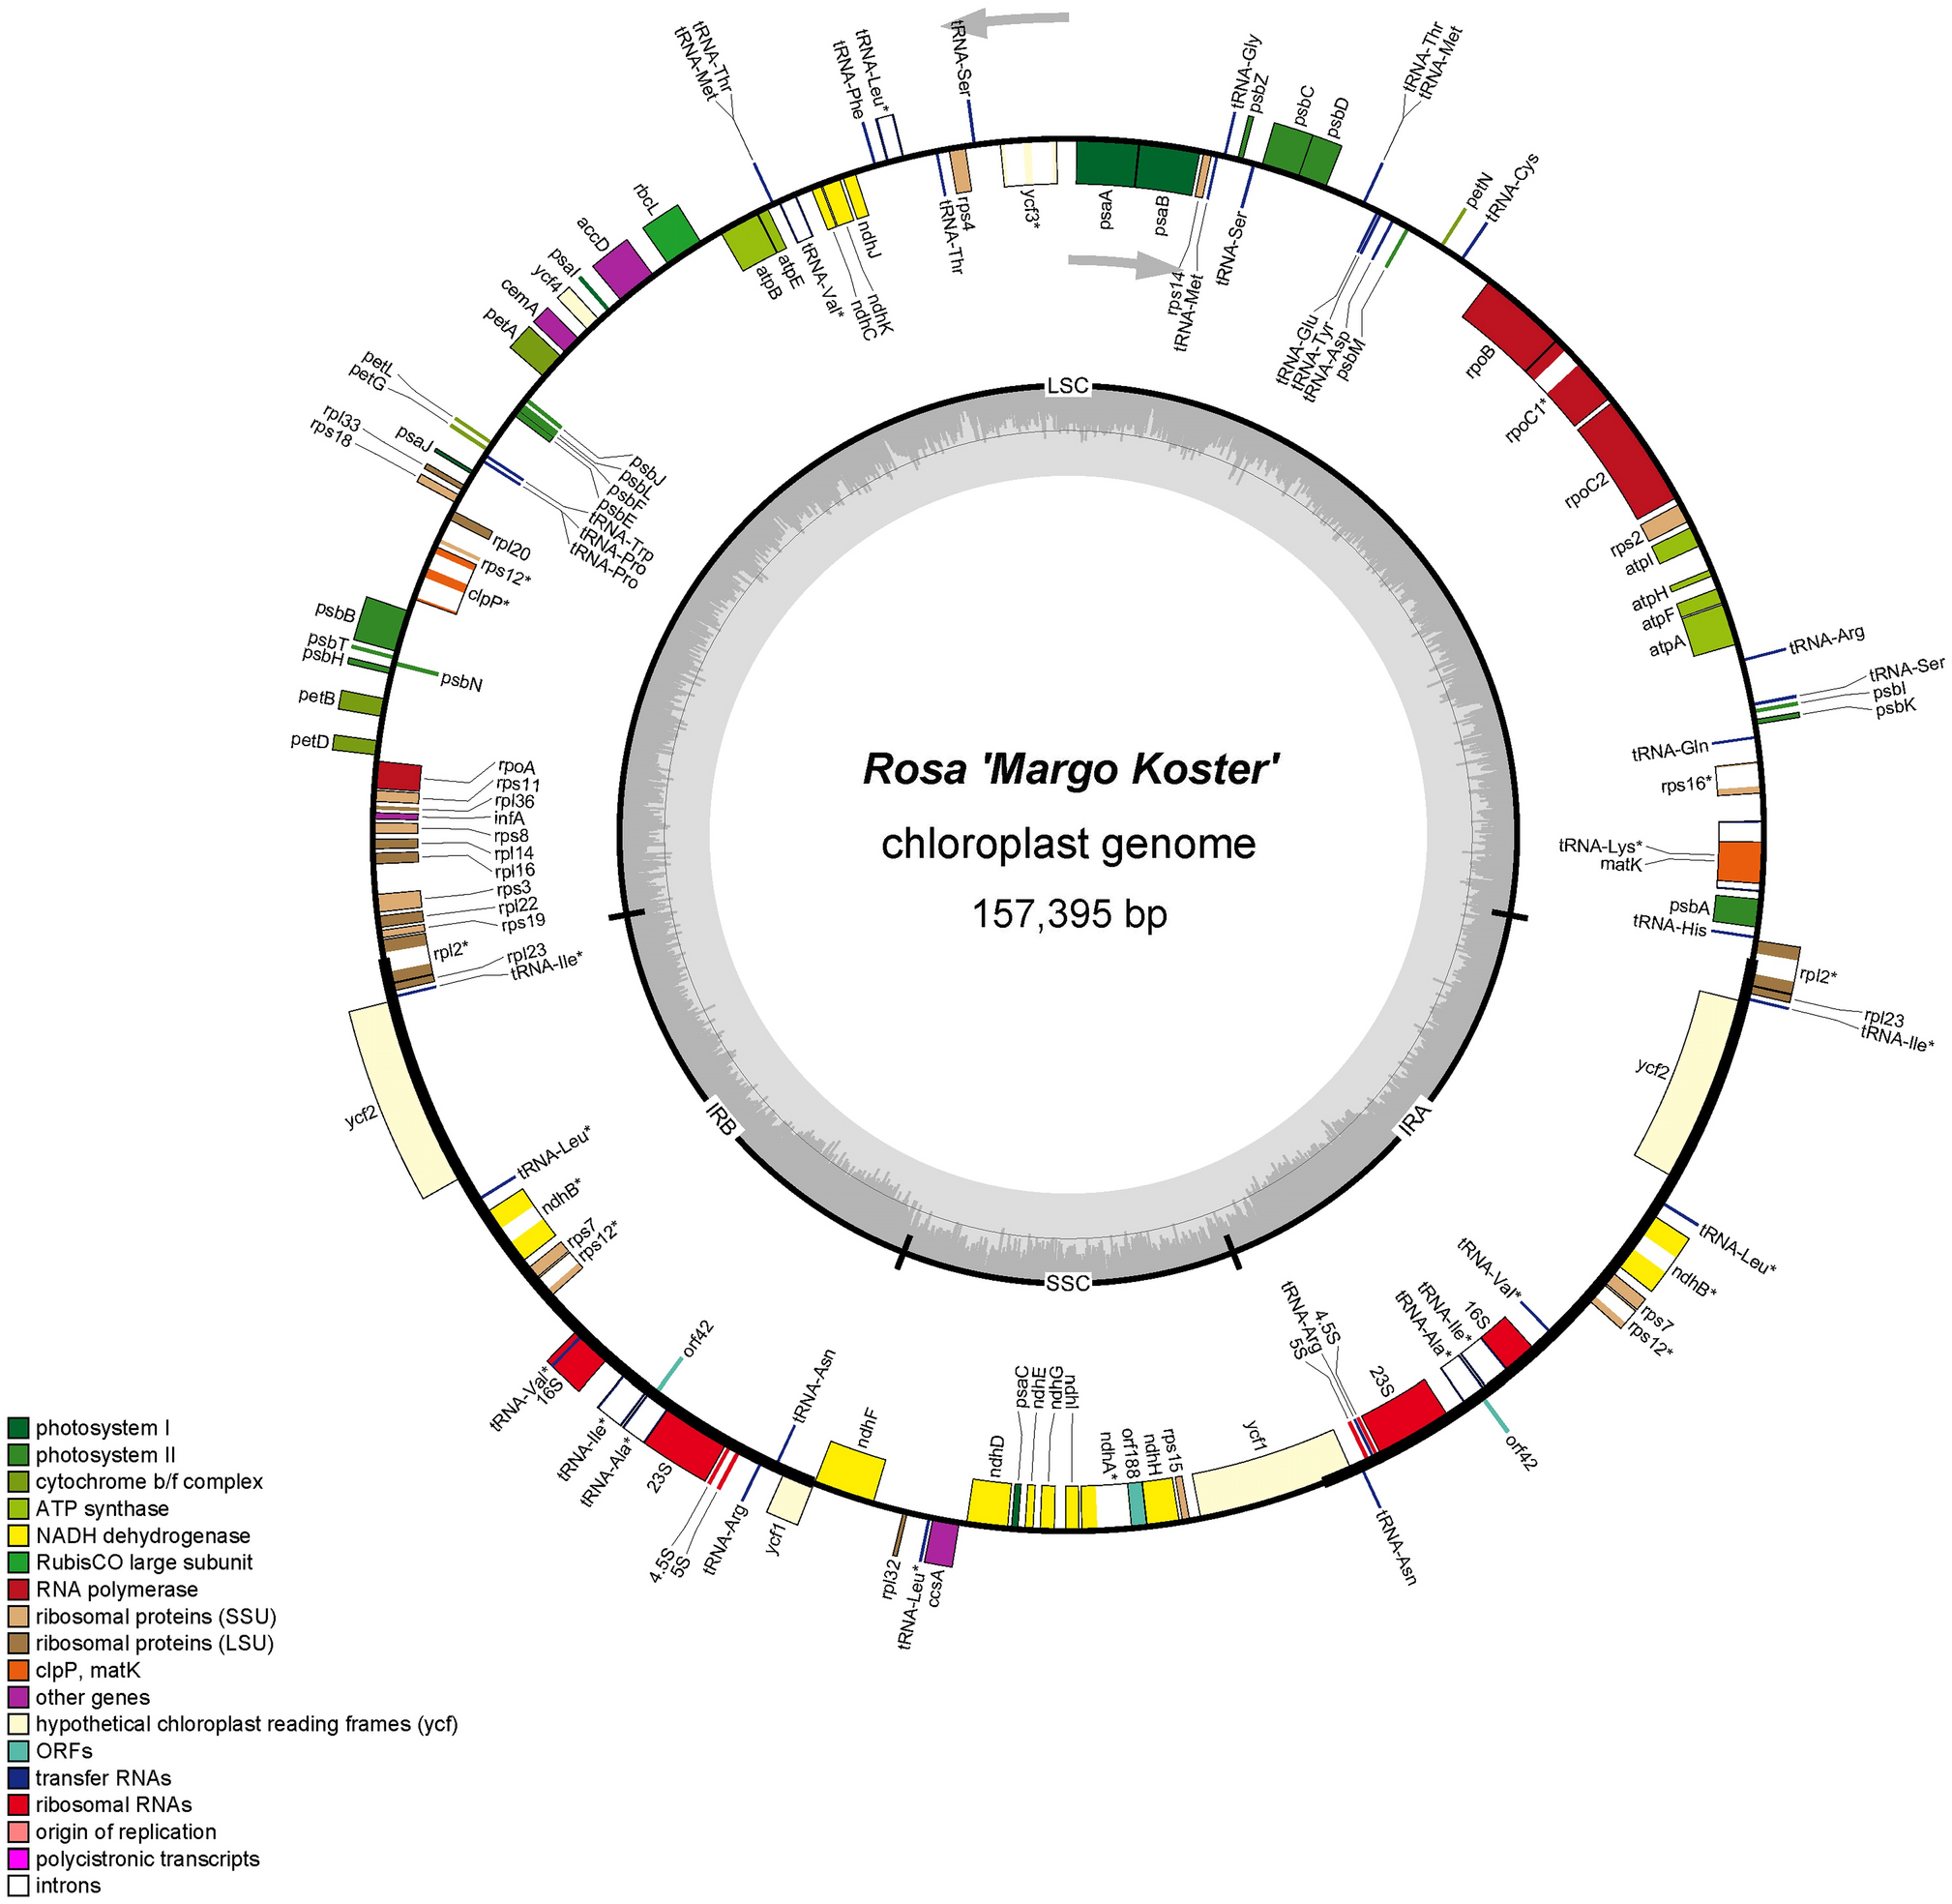 Nucleotide sequence of a preferred maize chloroplast genome template for in  vitro DNA synthesis